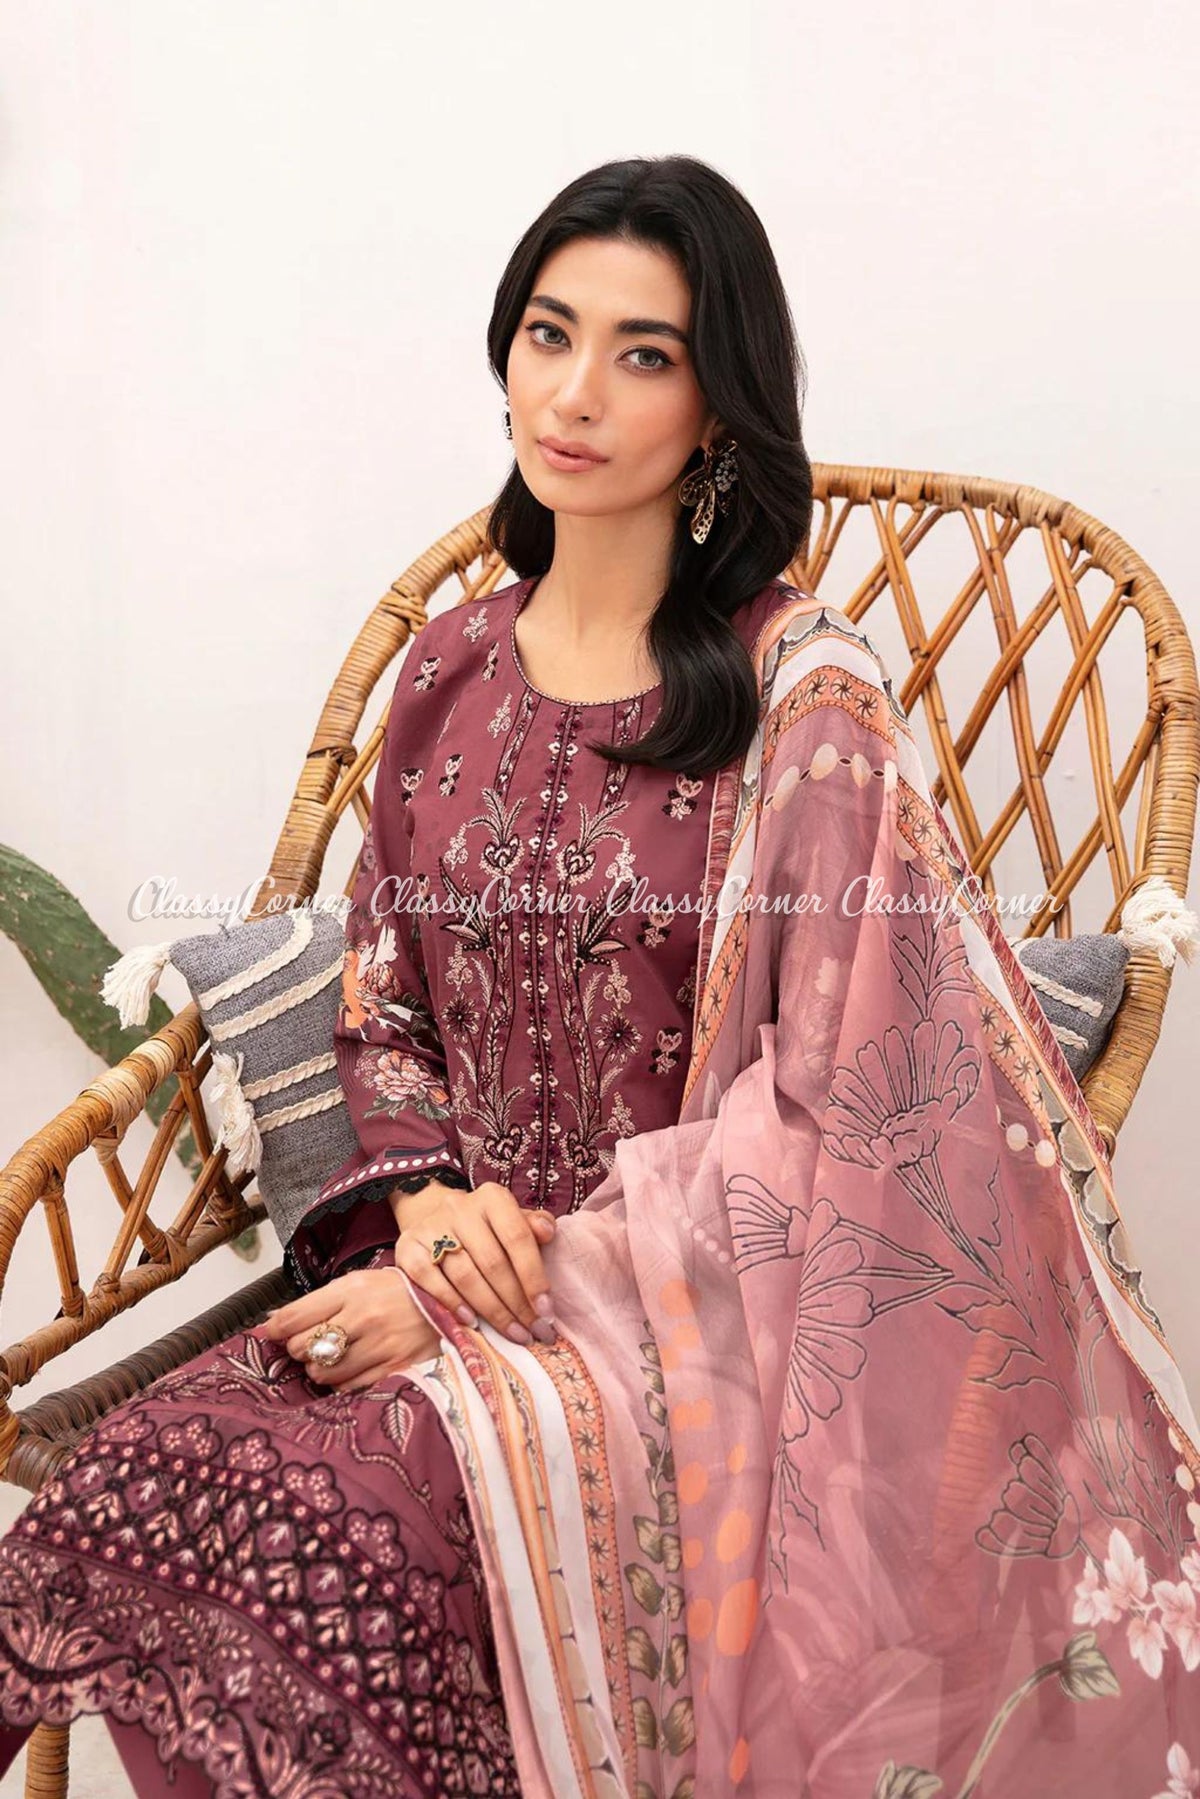 pakistani semi formal outfits for guests